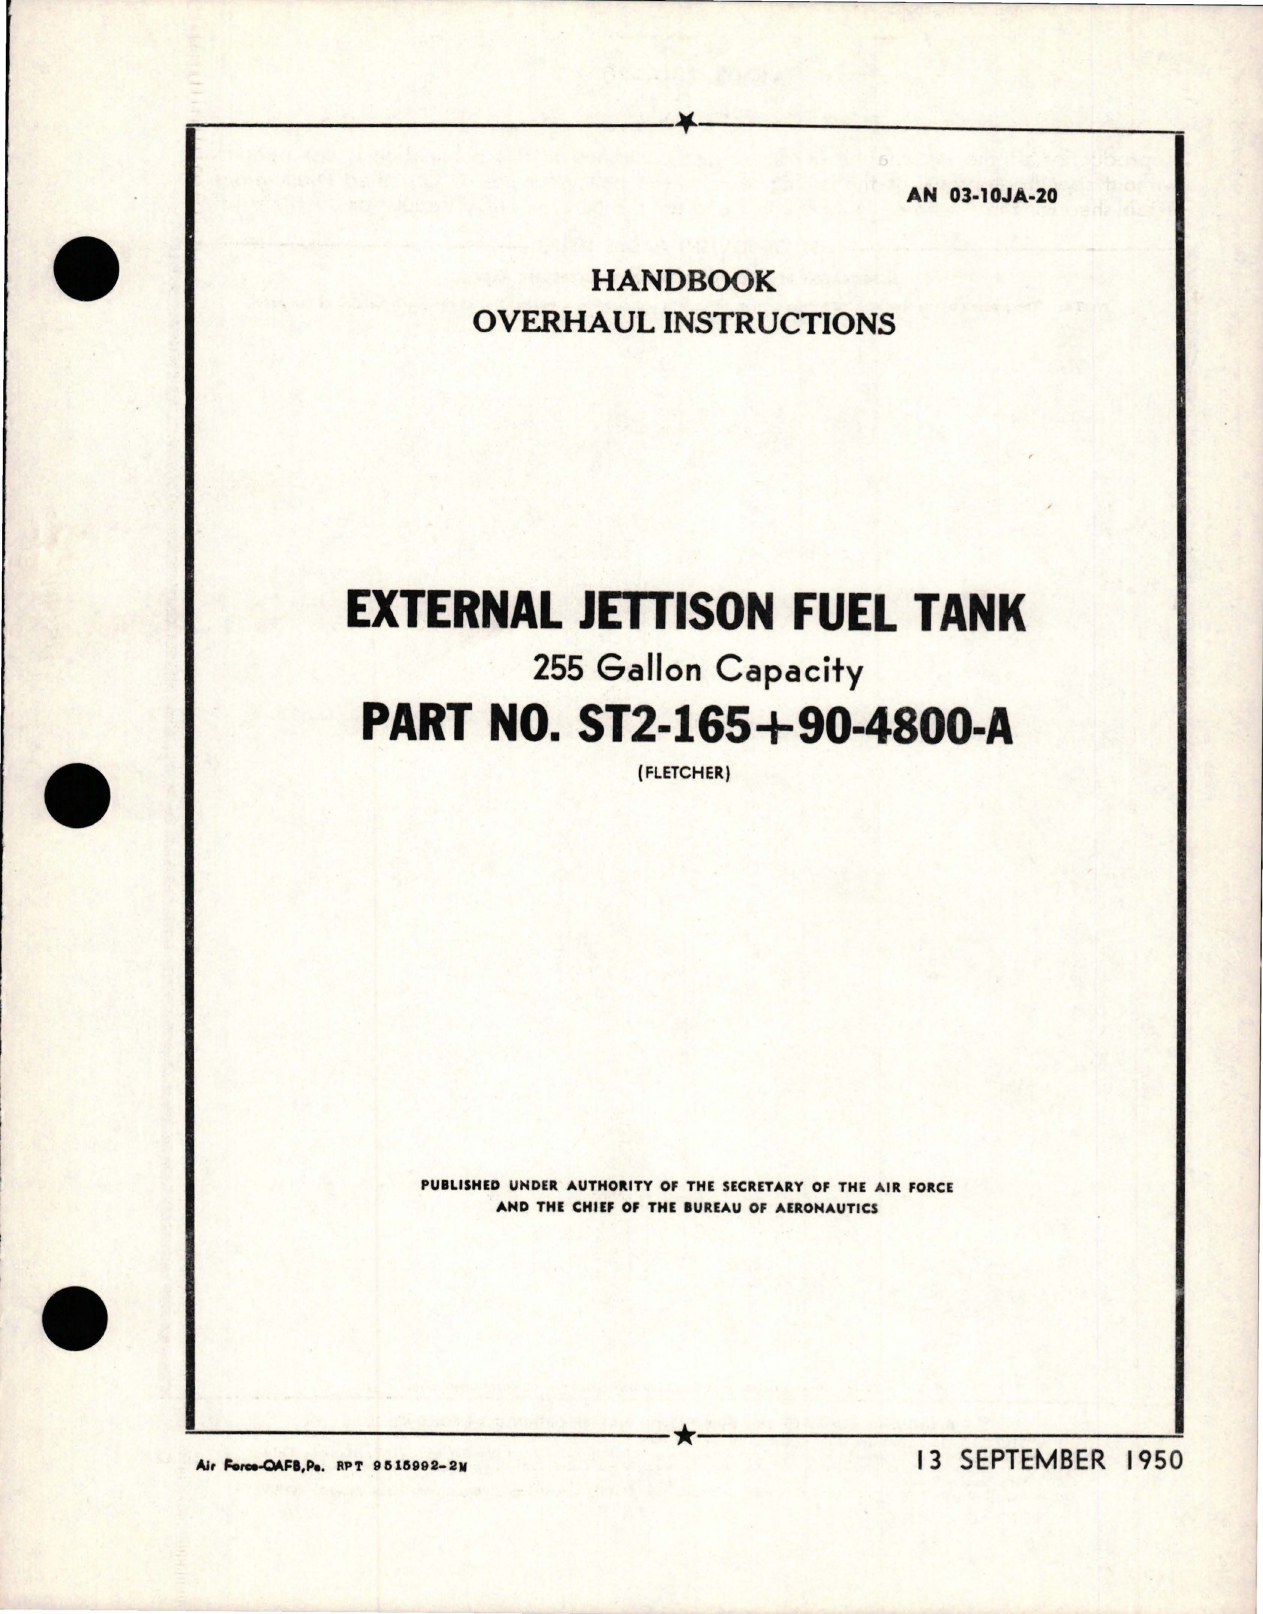 Sample page 1 from AirCorps Library document: Overhaul Instructions for External Jettison Fuel Tank - 255 Gal Capacity - Part ST2-165 and 90-4800-A